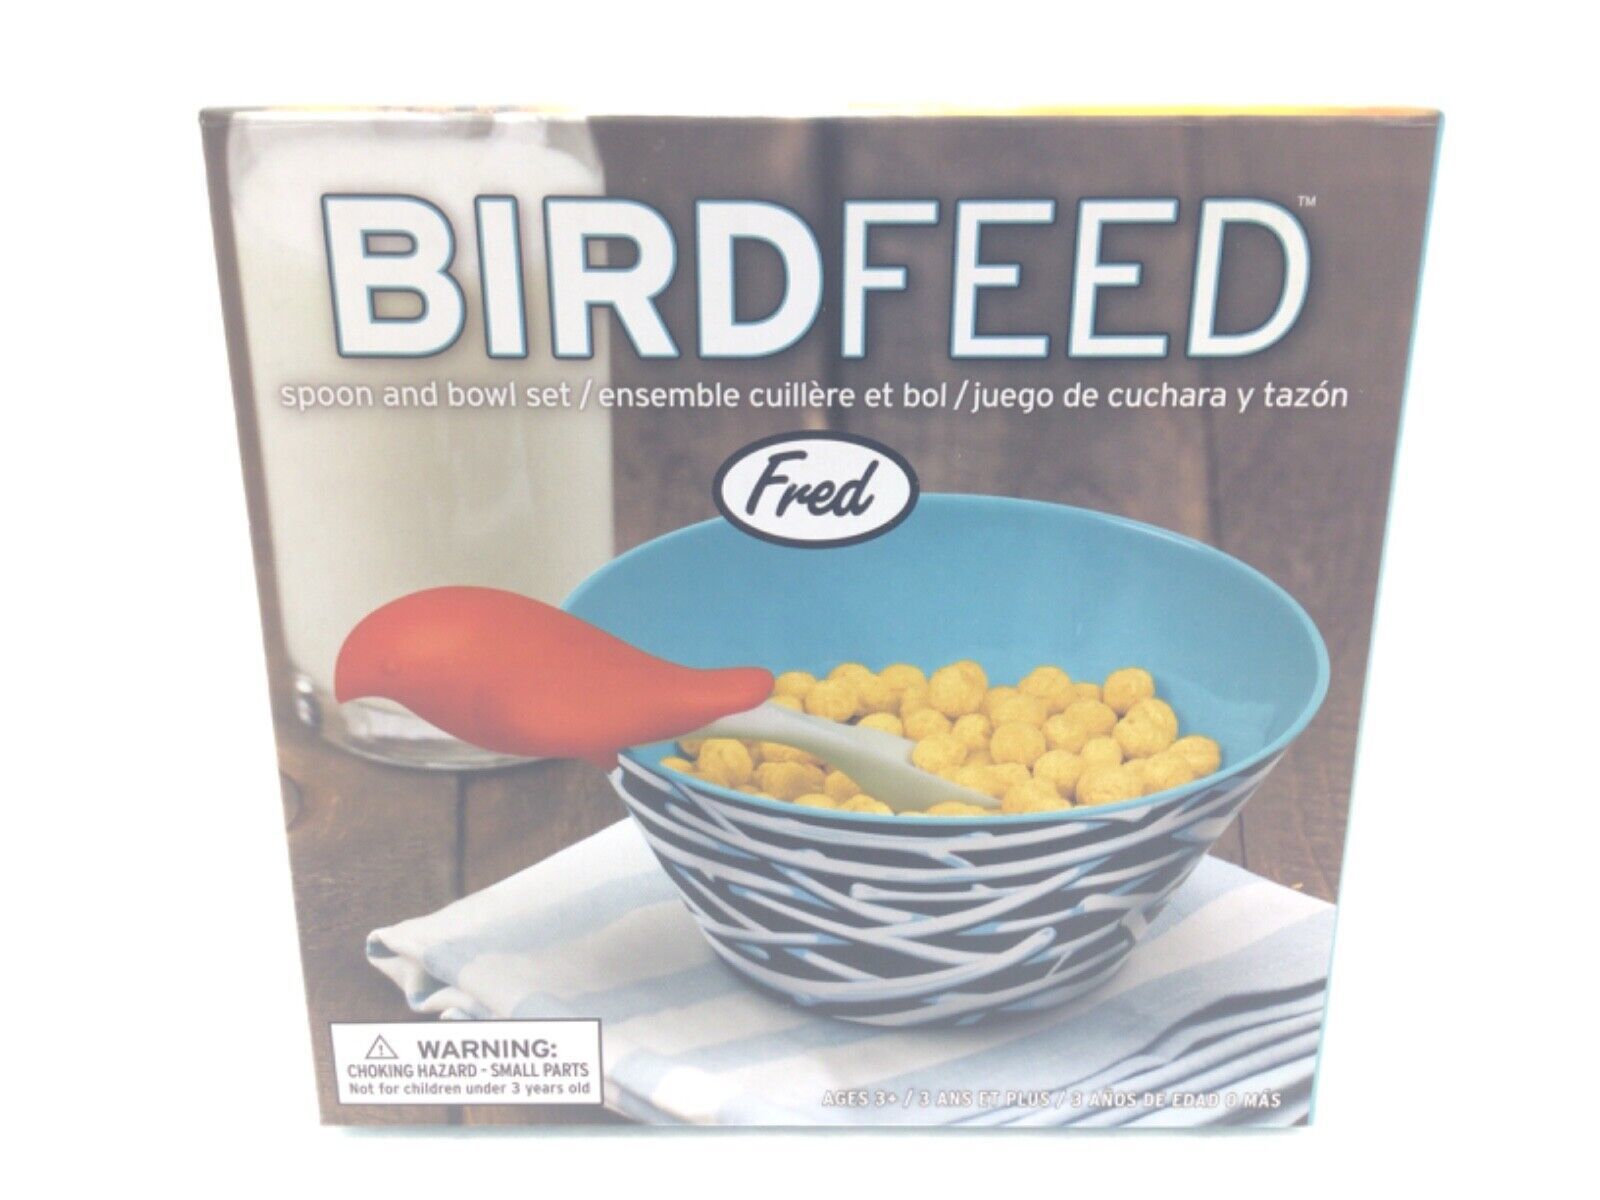 New Bird Feed Silicone Spoon and Bowl Set Age 3+ By Fred New in Box - $7.28